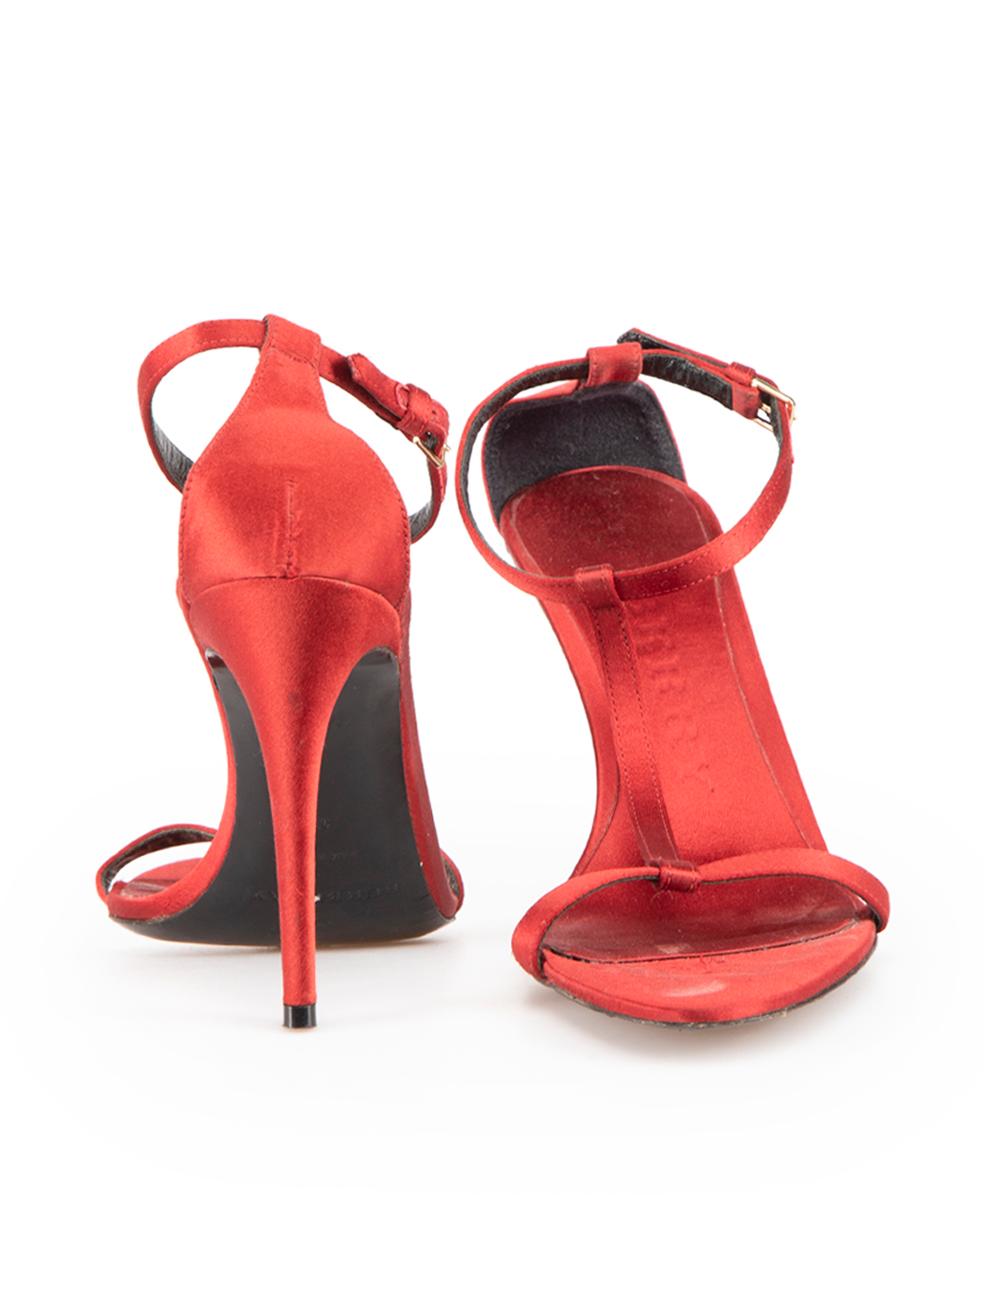 Burberry Red Satin Heeled Sandals Size IT 37 In Good Condition For Sale In London, GB